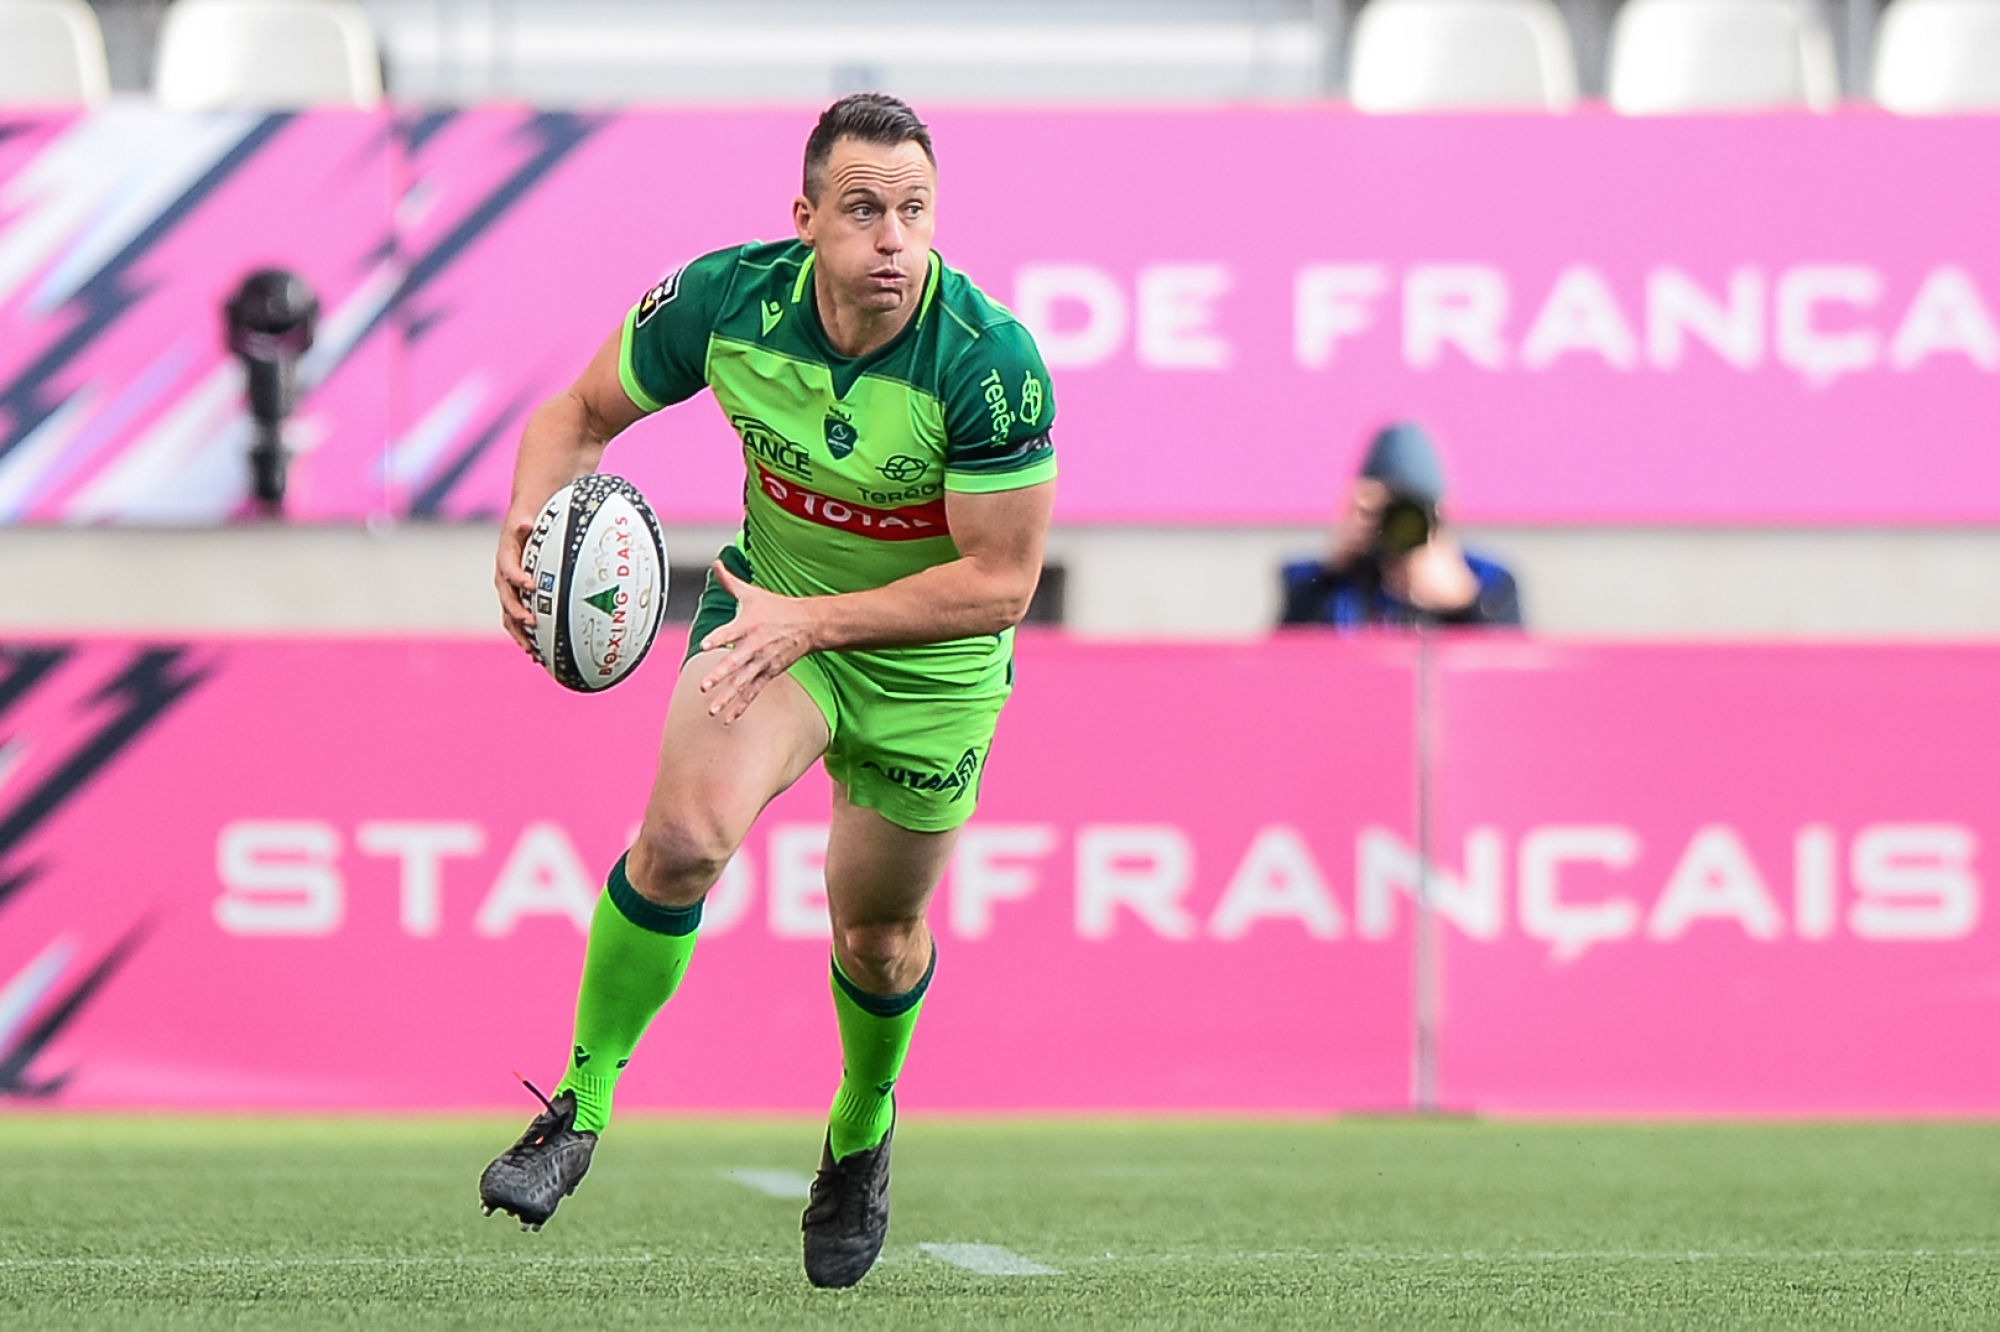 Ben SMITH of Pau during the Top 14 match between Stade Francais and Pau at Stade Jean Bouin on December 22, 2019 in Paris, France. (Photo by Baptiste Fernandez/Icon Sport) - Ben SMITH - Stade Jean Bouin - Paris (France)